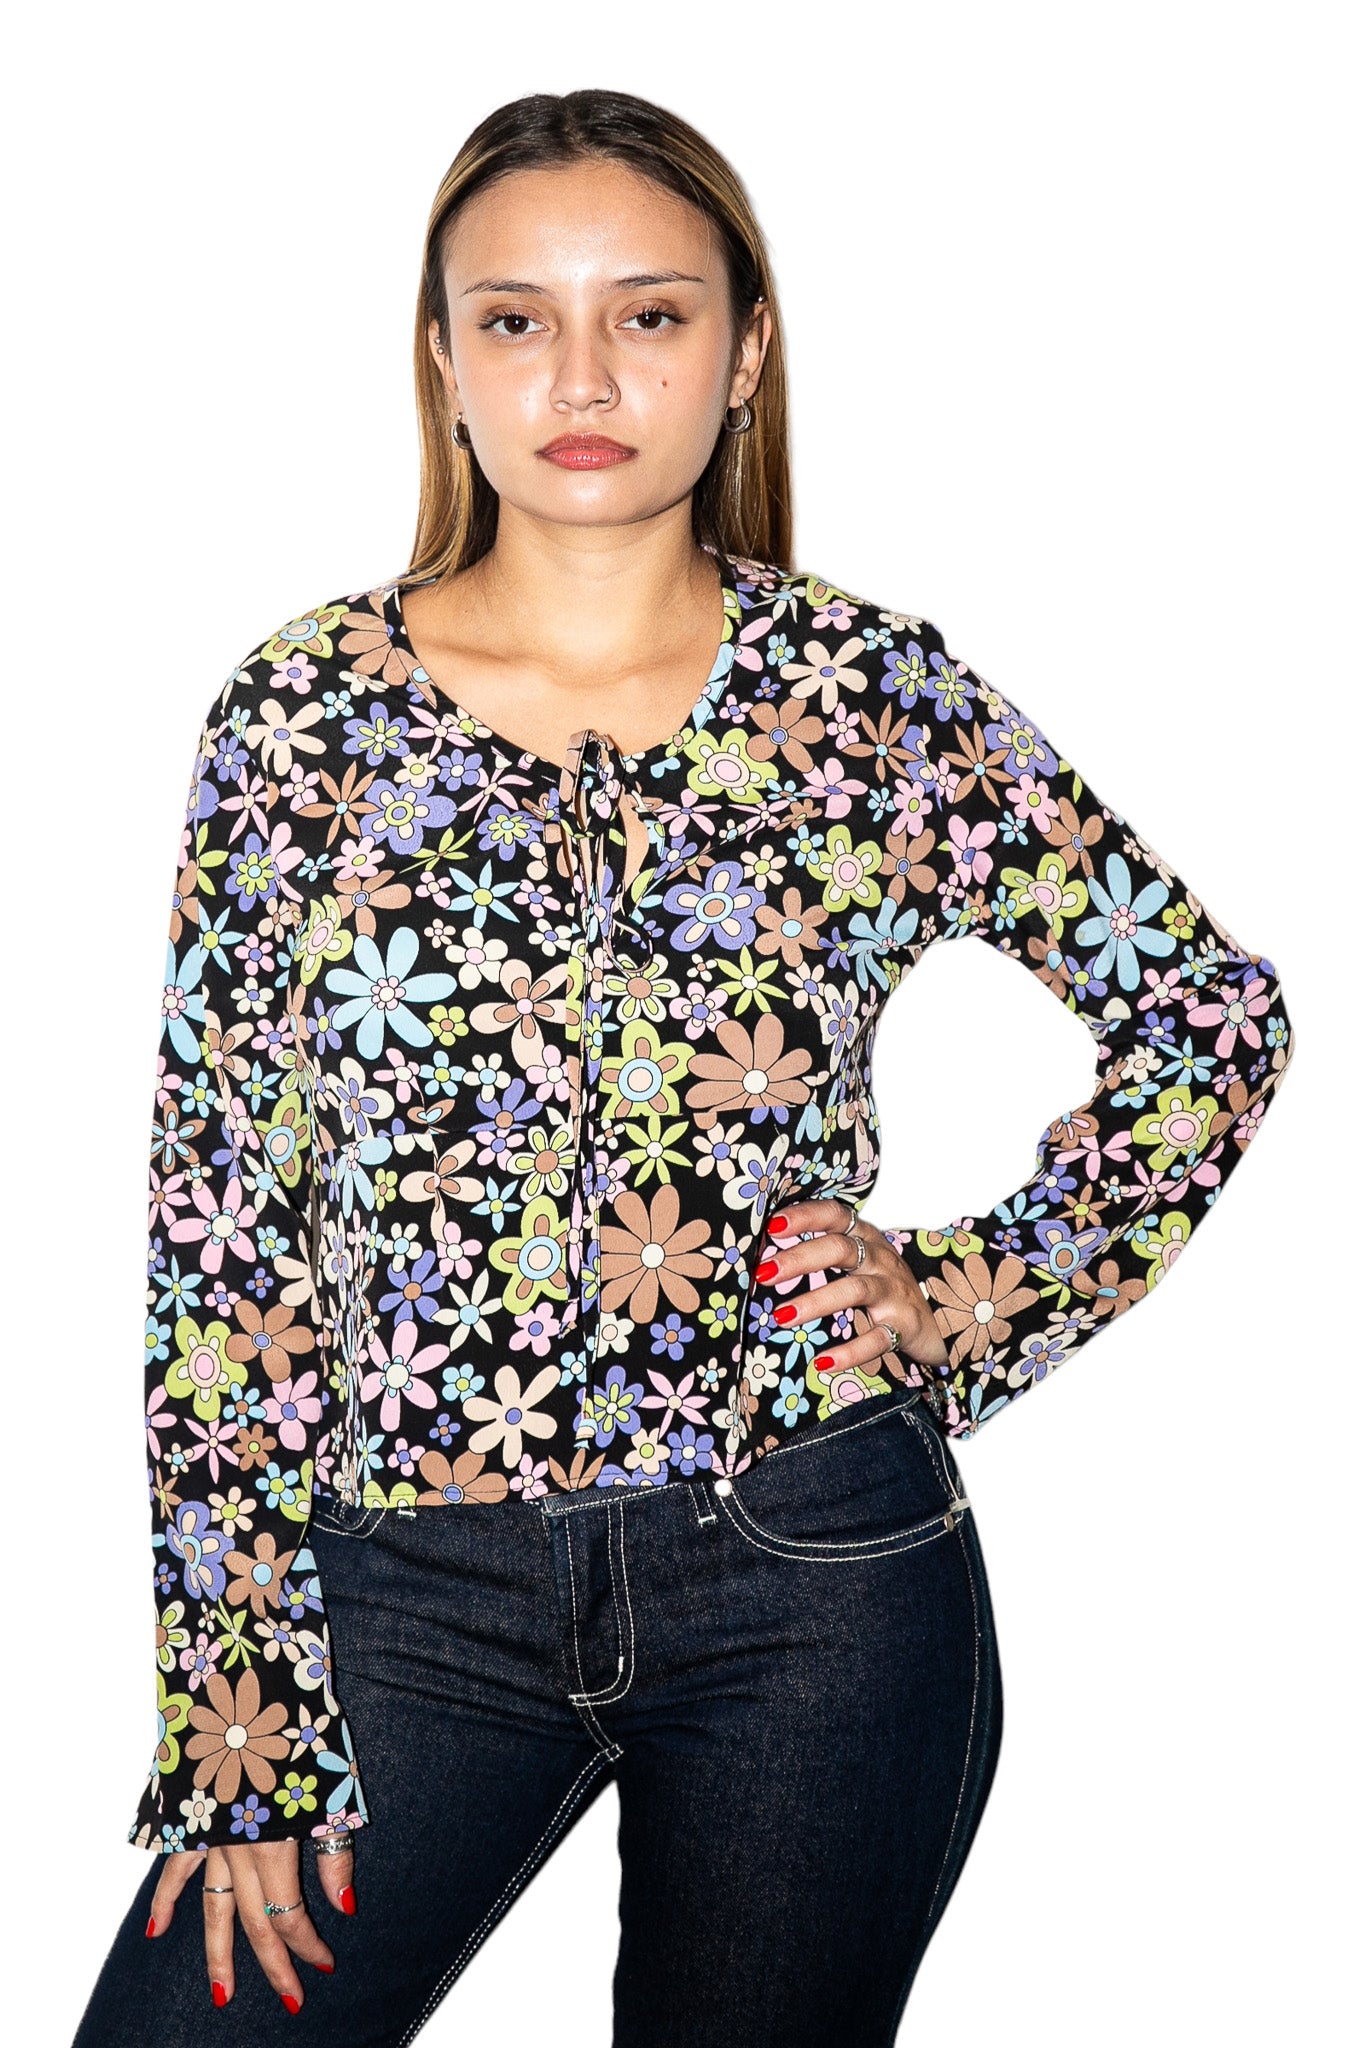 DEADSTOCK XOXO 90'S DOES 60'S FLORAL BELL SLEEVE TOP